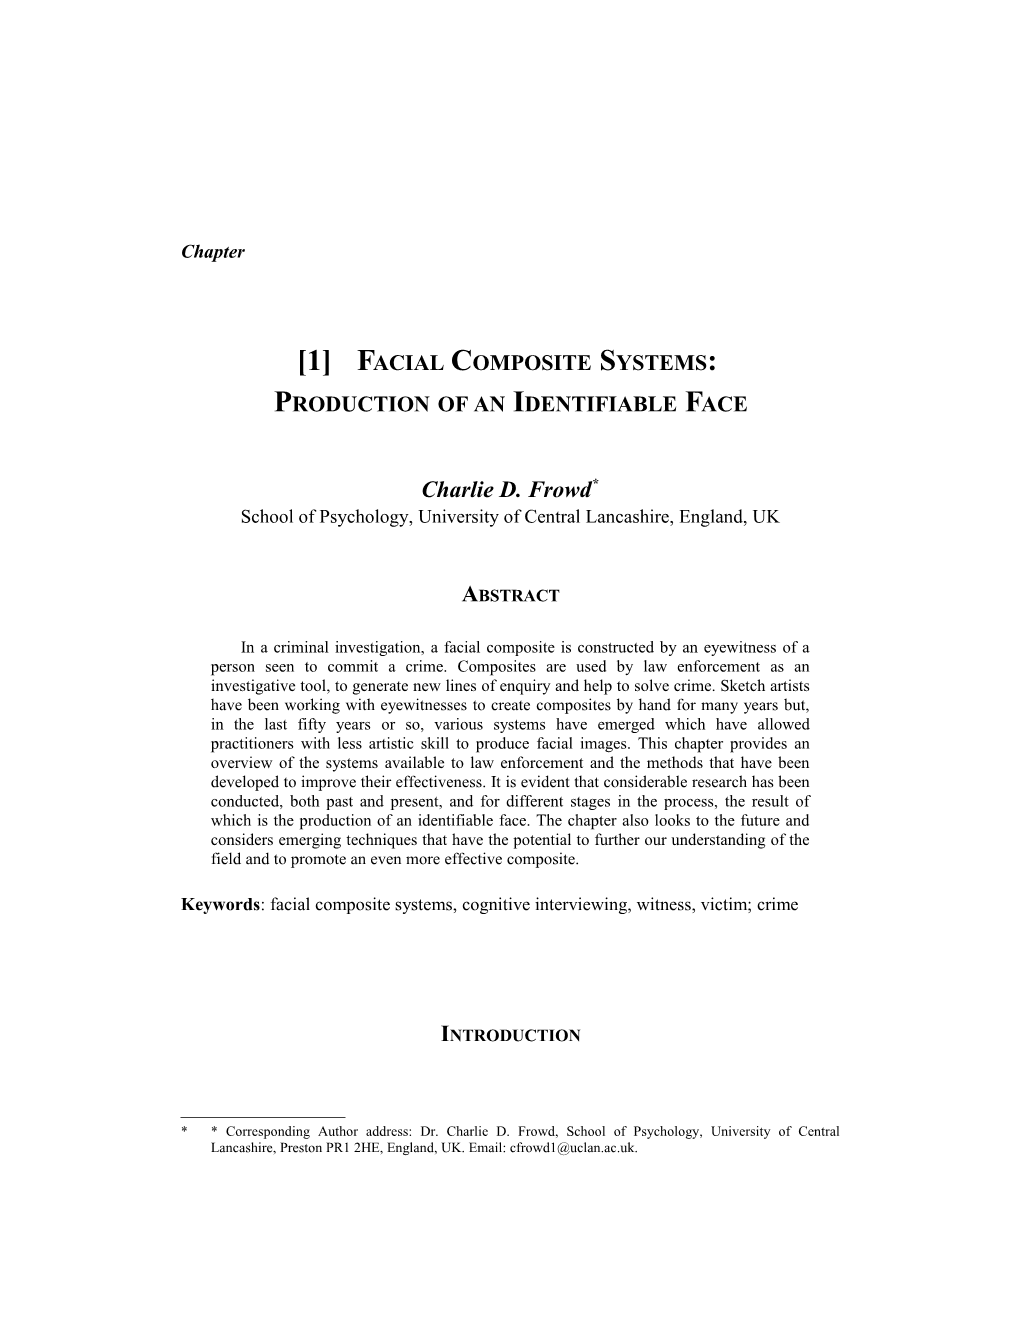 Facial Composite Systems: Production of an Identifiable Face